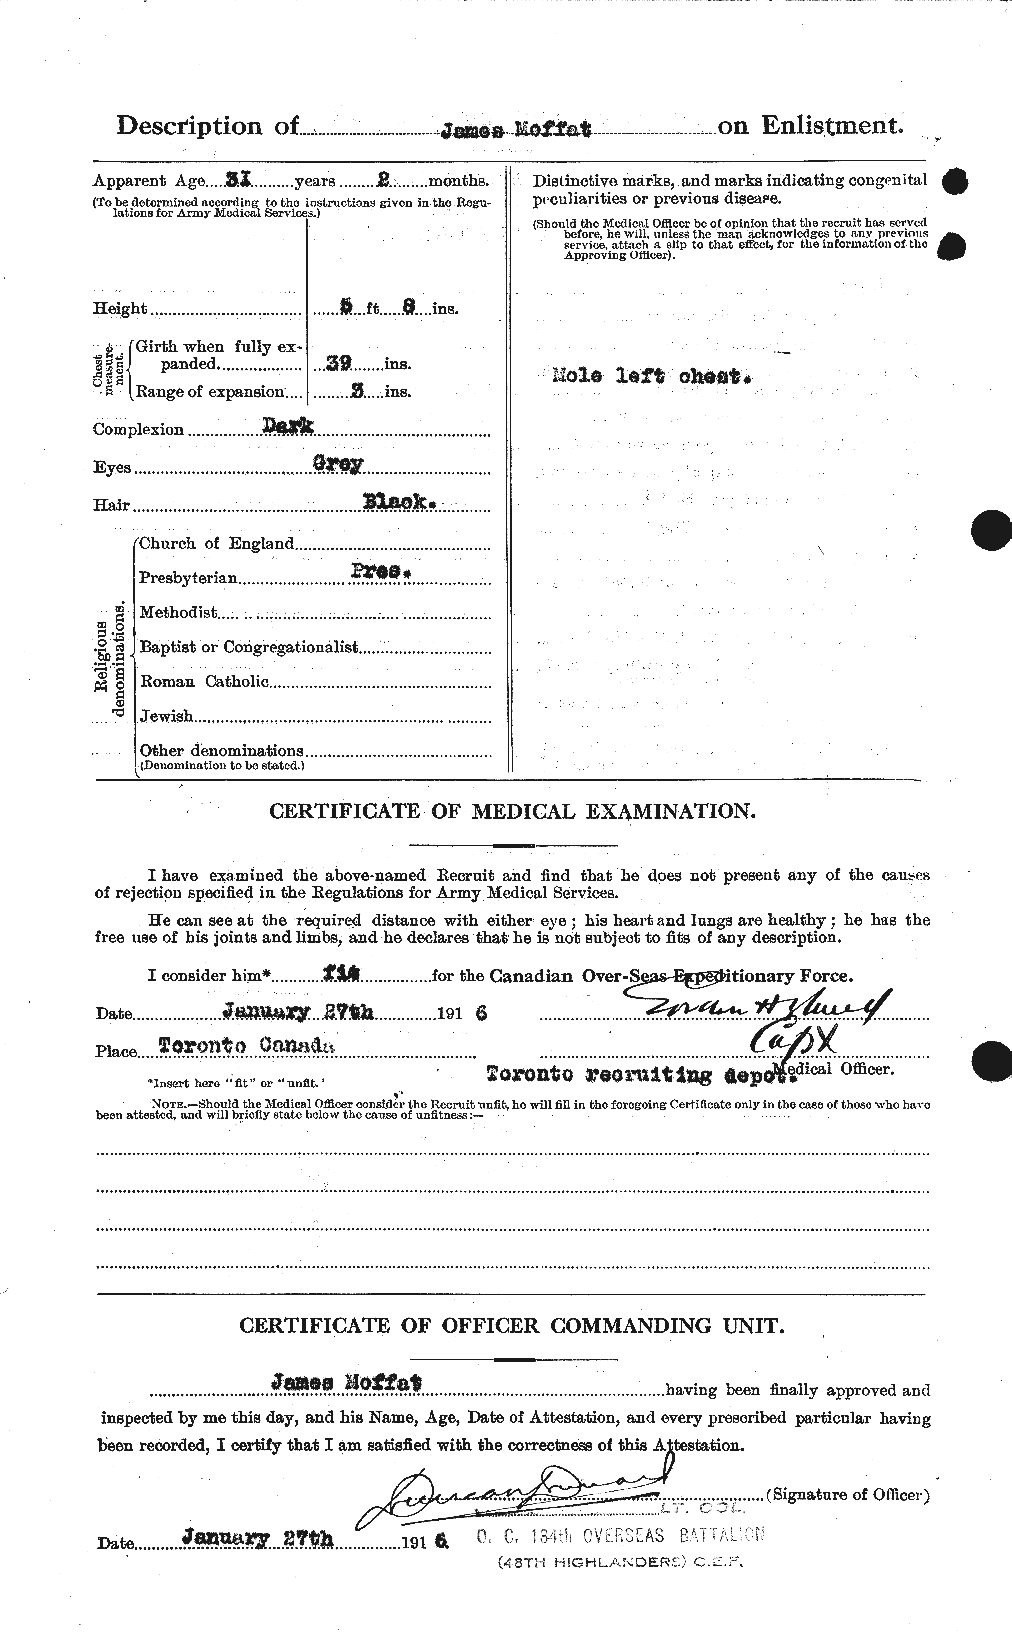 Personnel Records of the First World War - CEF 499033b